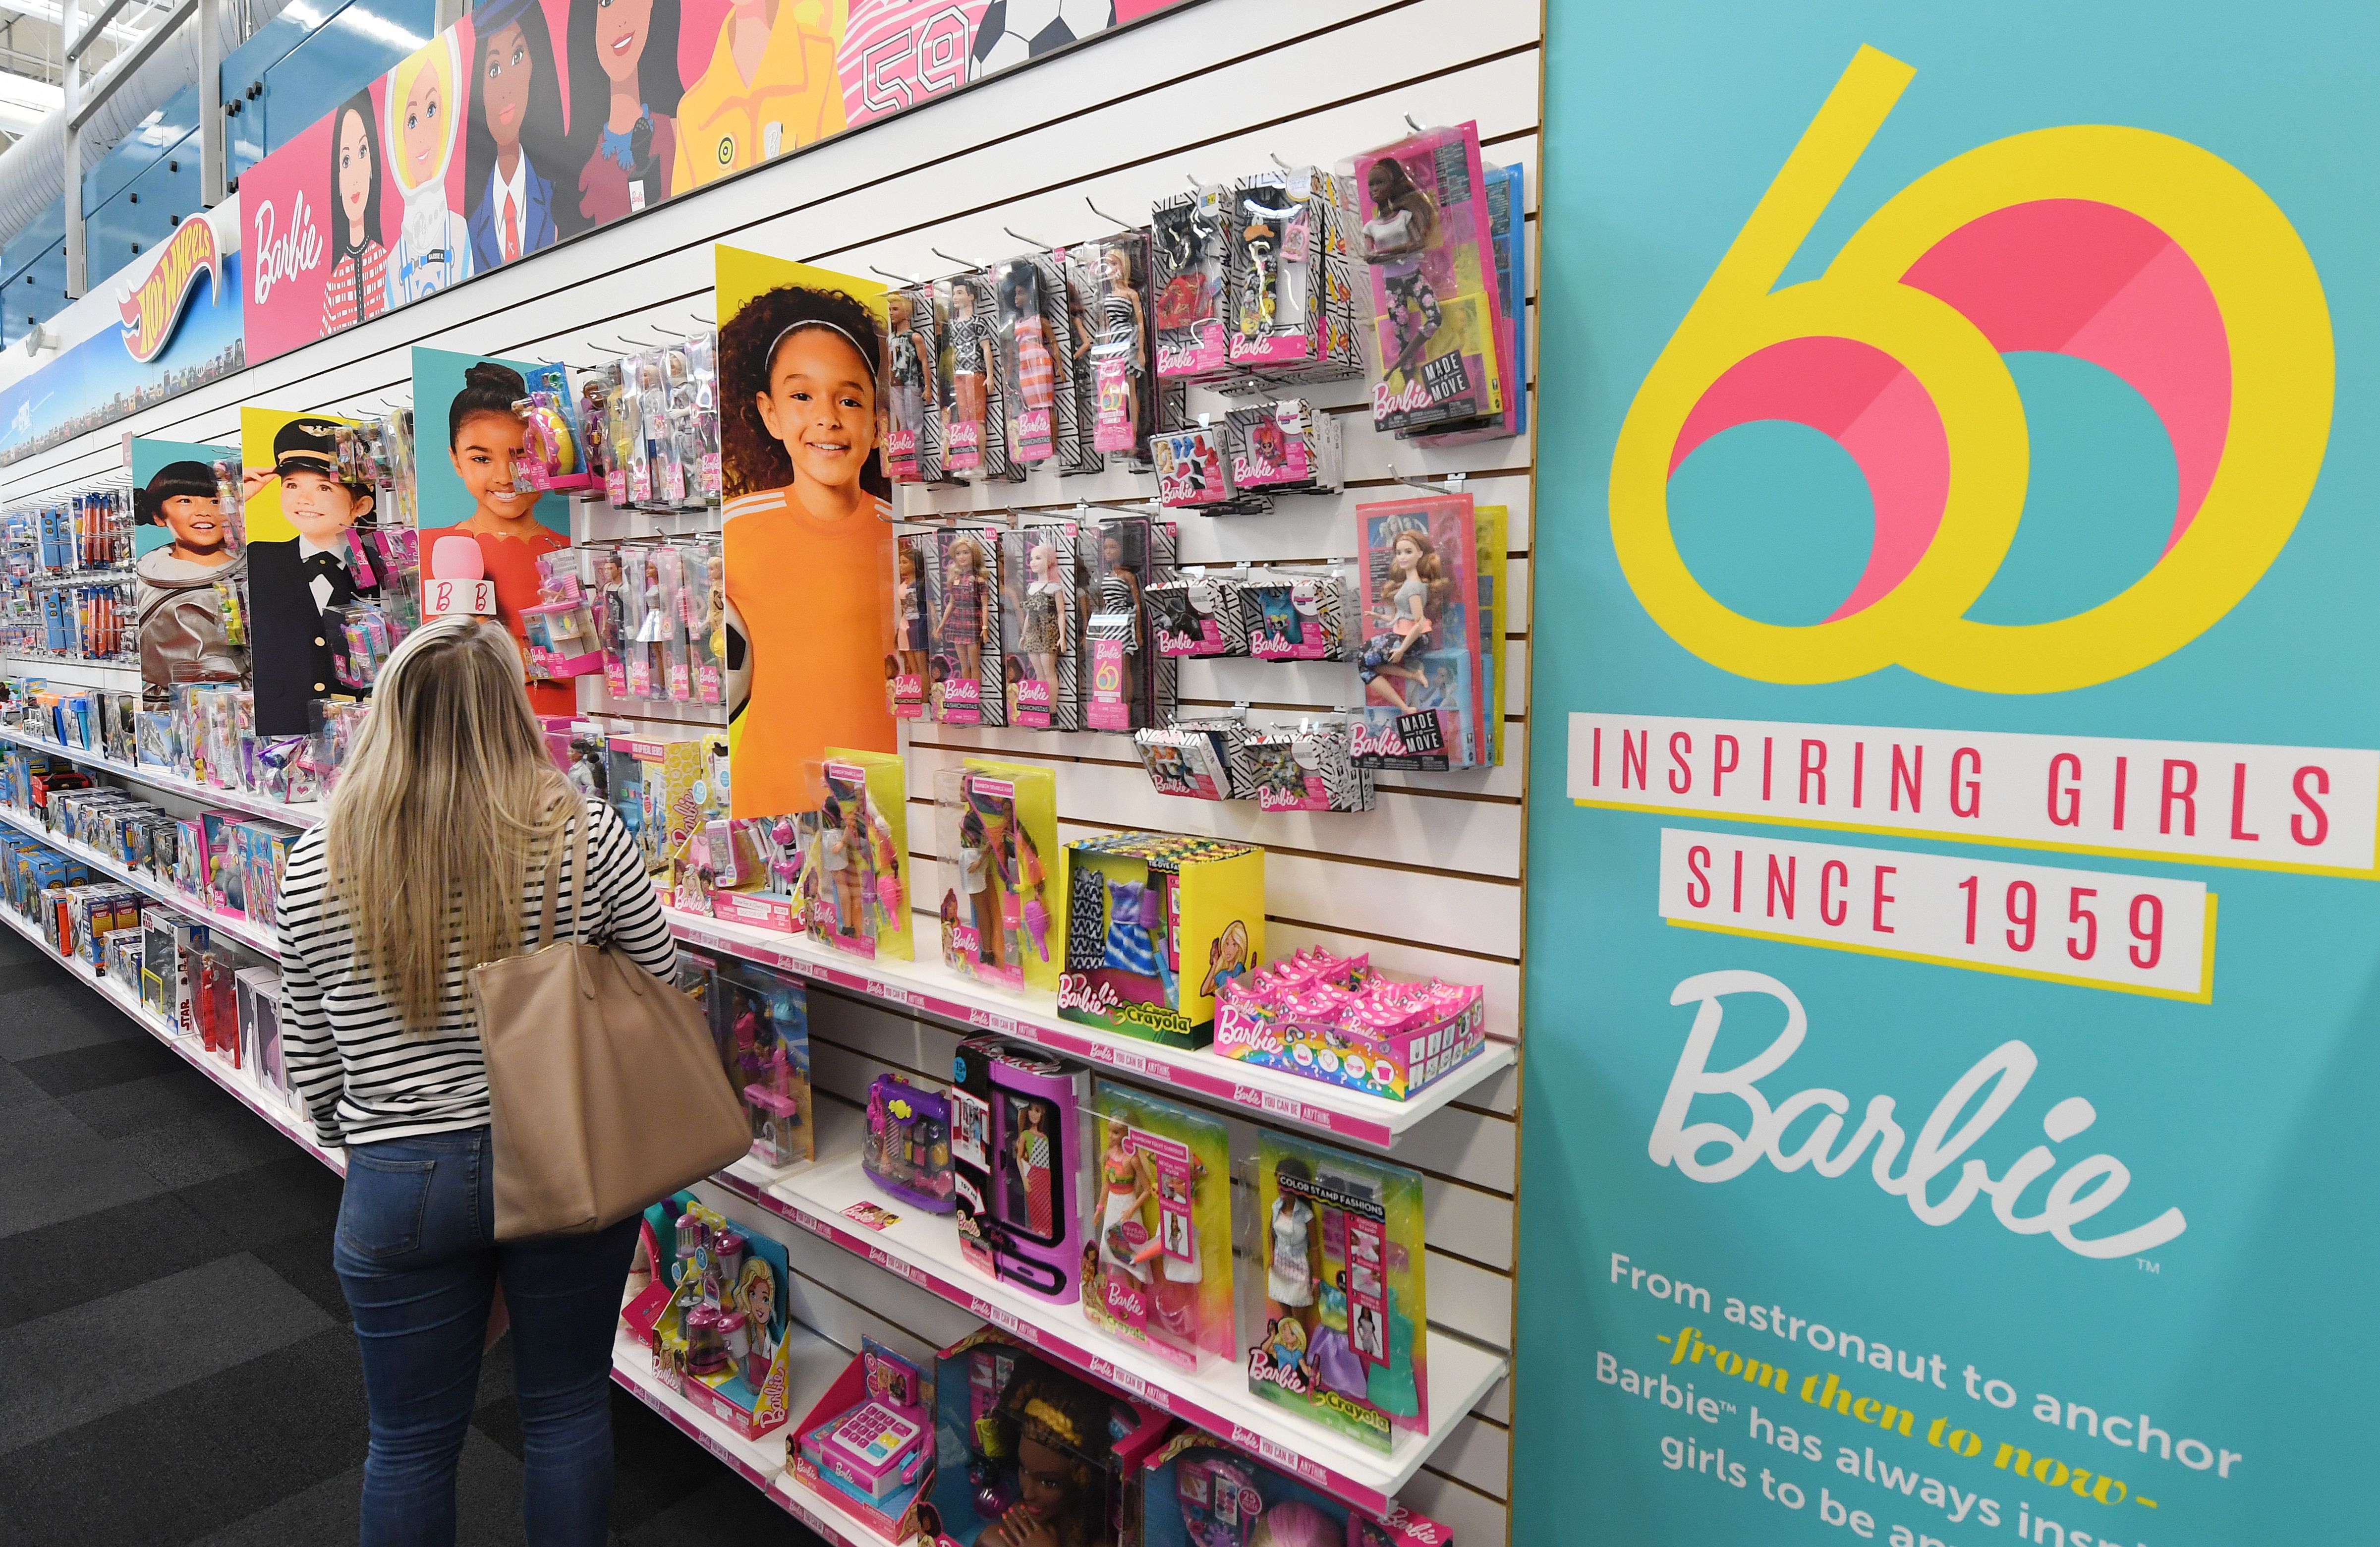 Barbie dolls are displayed at a workshop in the Mattel design center as the iconic doll turns 60